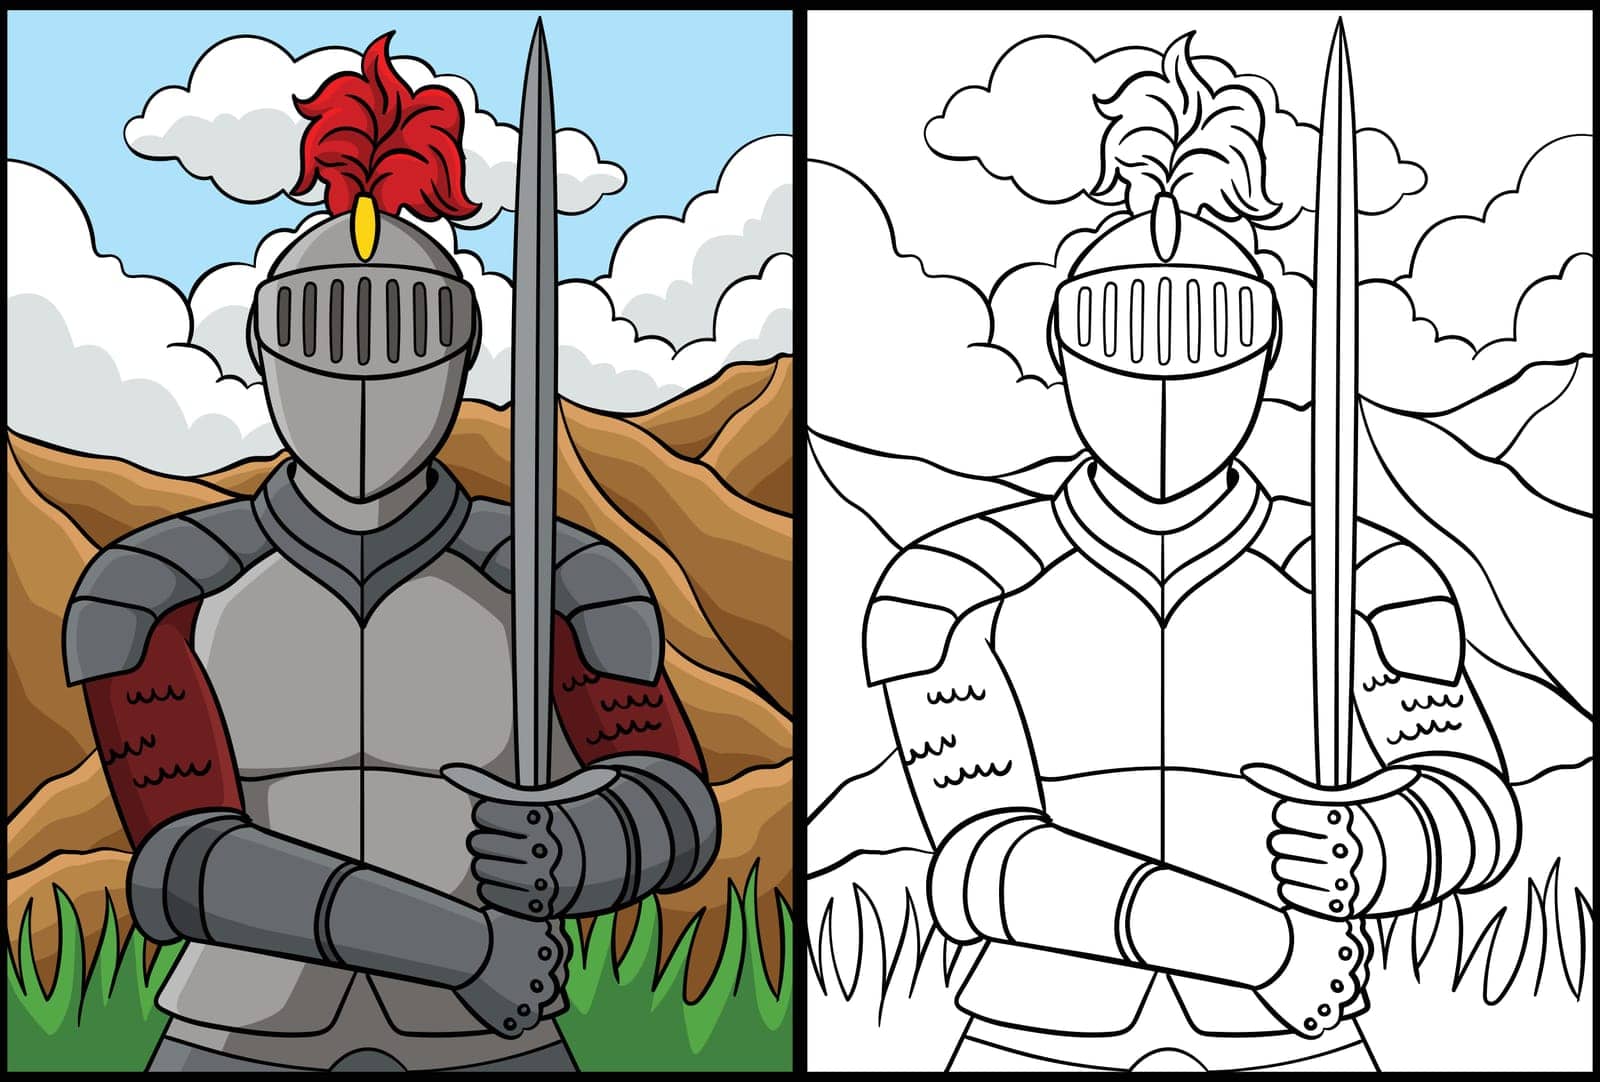 This coloring page shows a Knight in Armor. One side of this illustration is colored and serves as an inspiration for children.